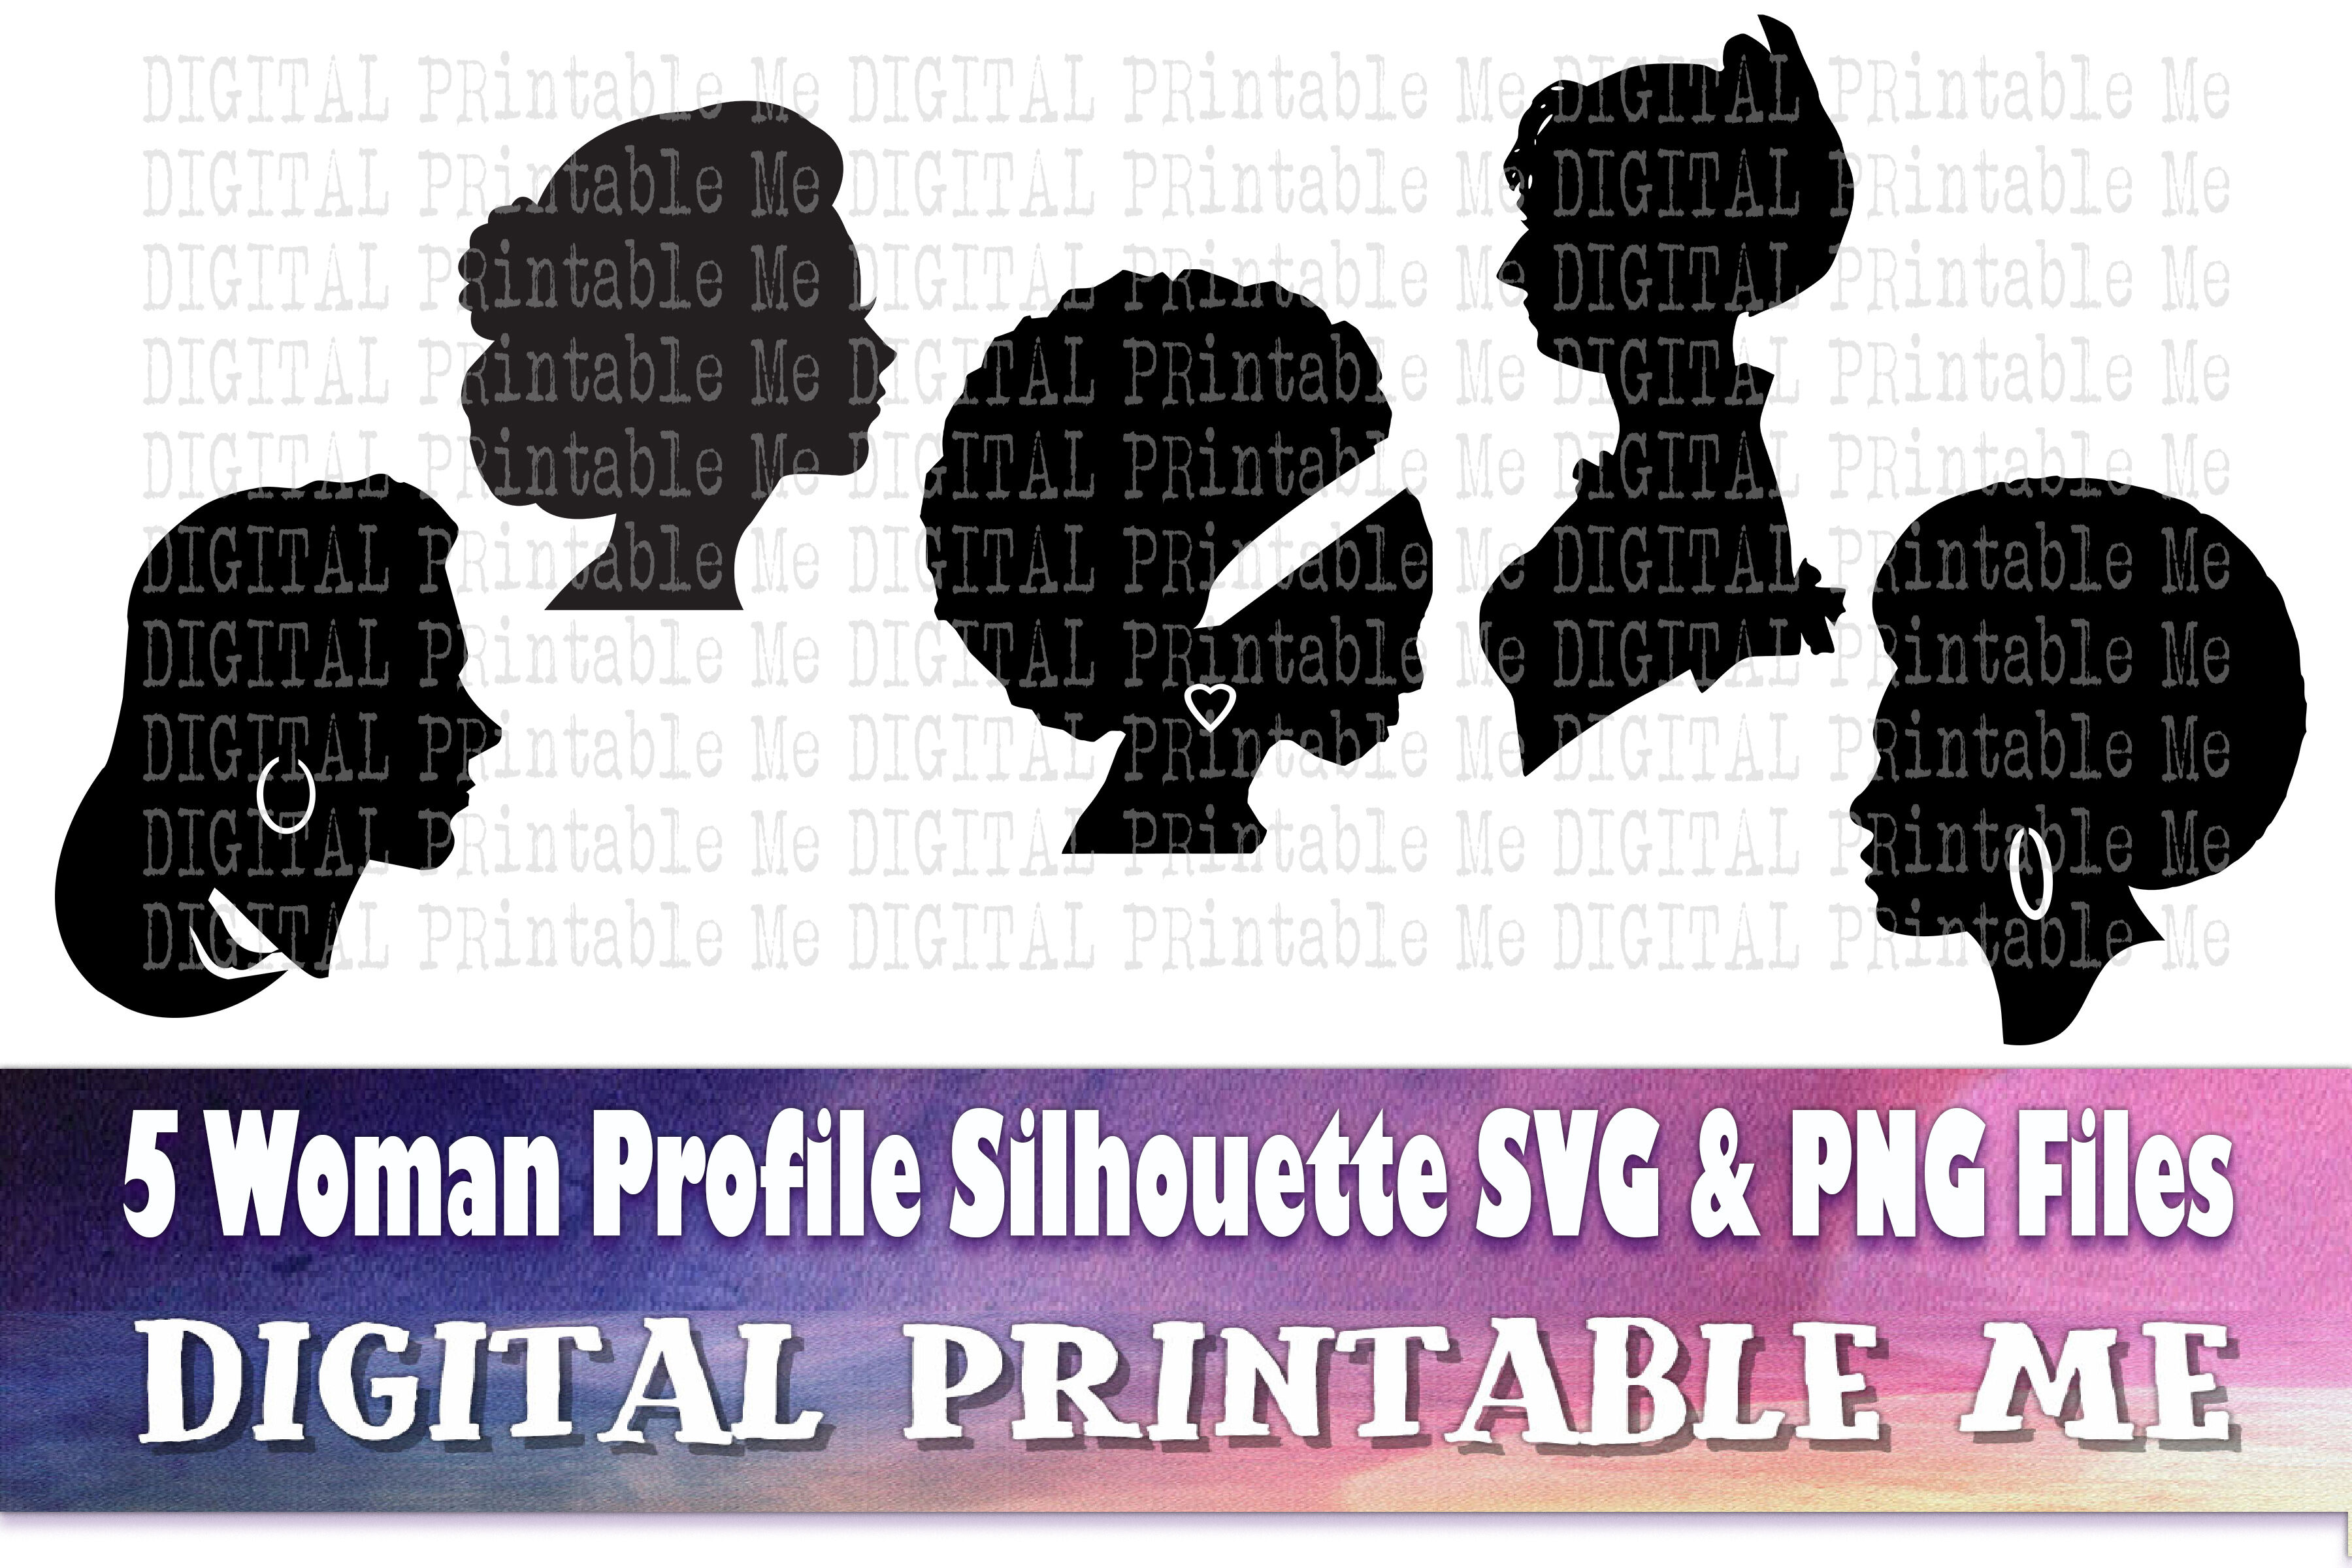 girl side view silhouette